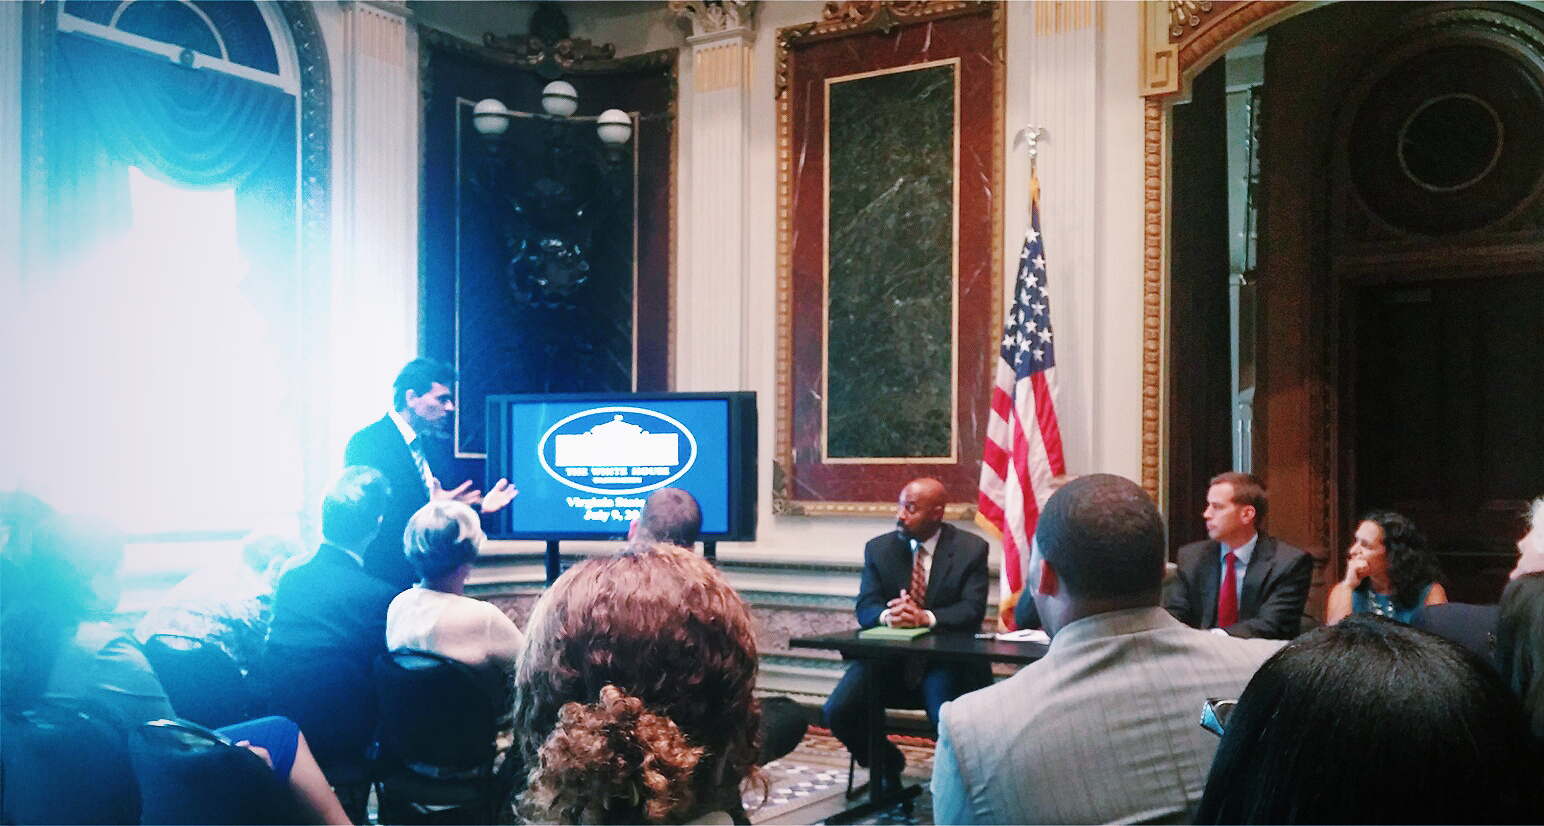 Andres Useche speaks at the White House.